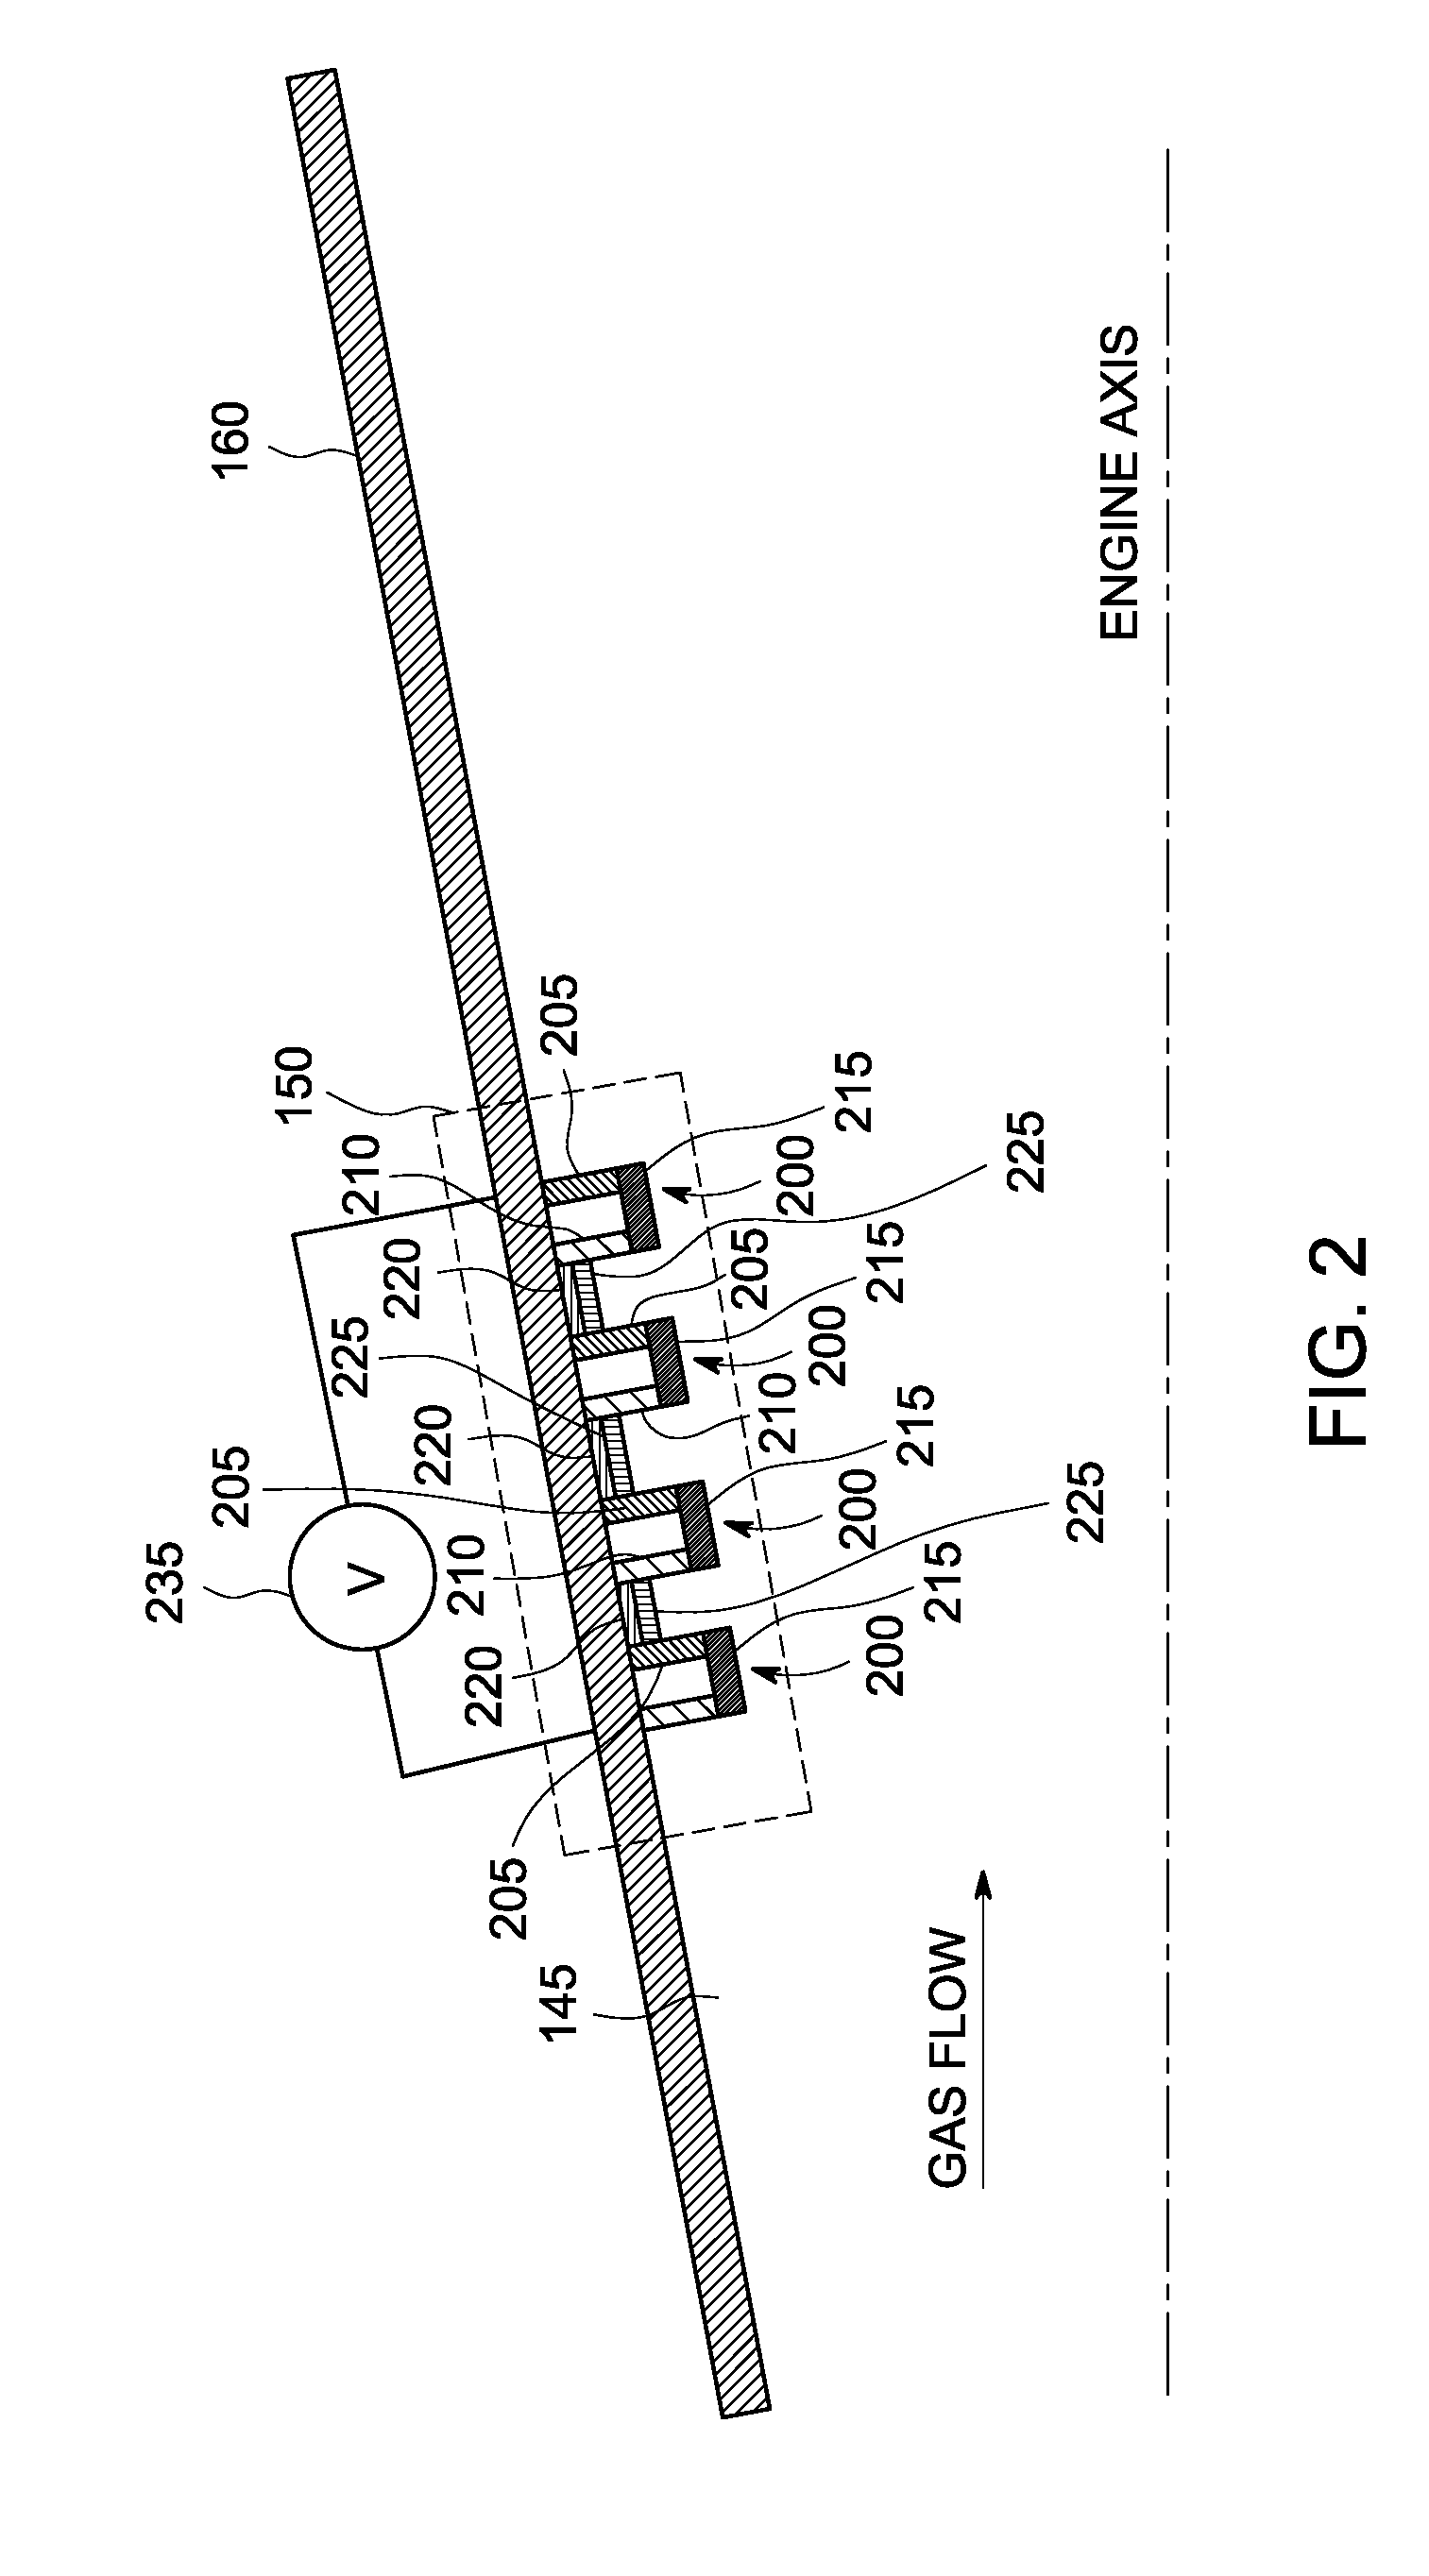 Turbulated arrangement of thermoelectric elements for utilizing waste heat generated from turbine engine